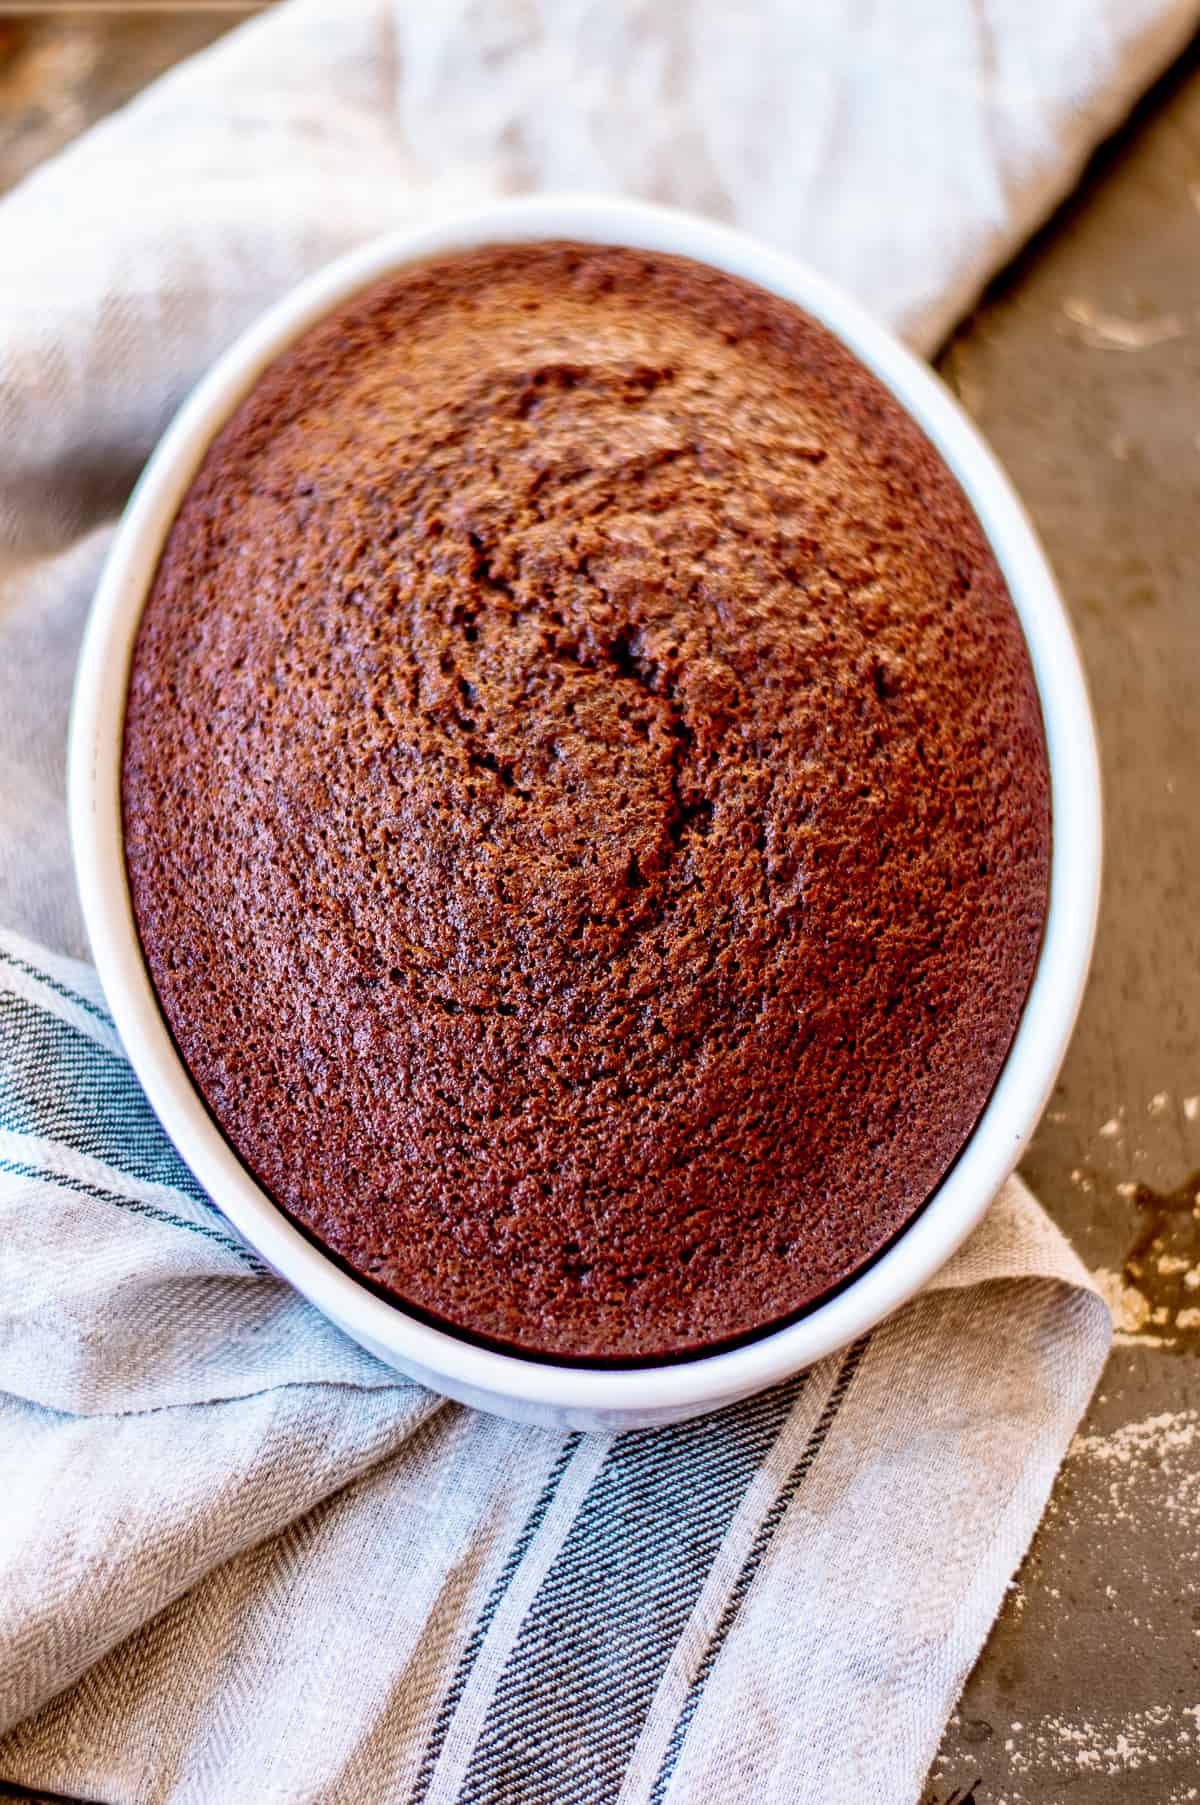 Sticky date pudding baked in the oven